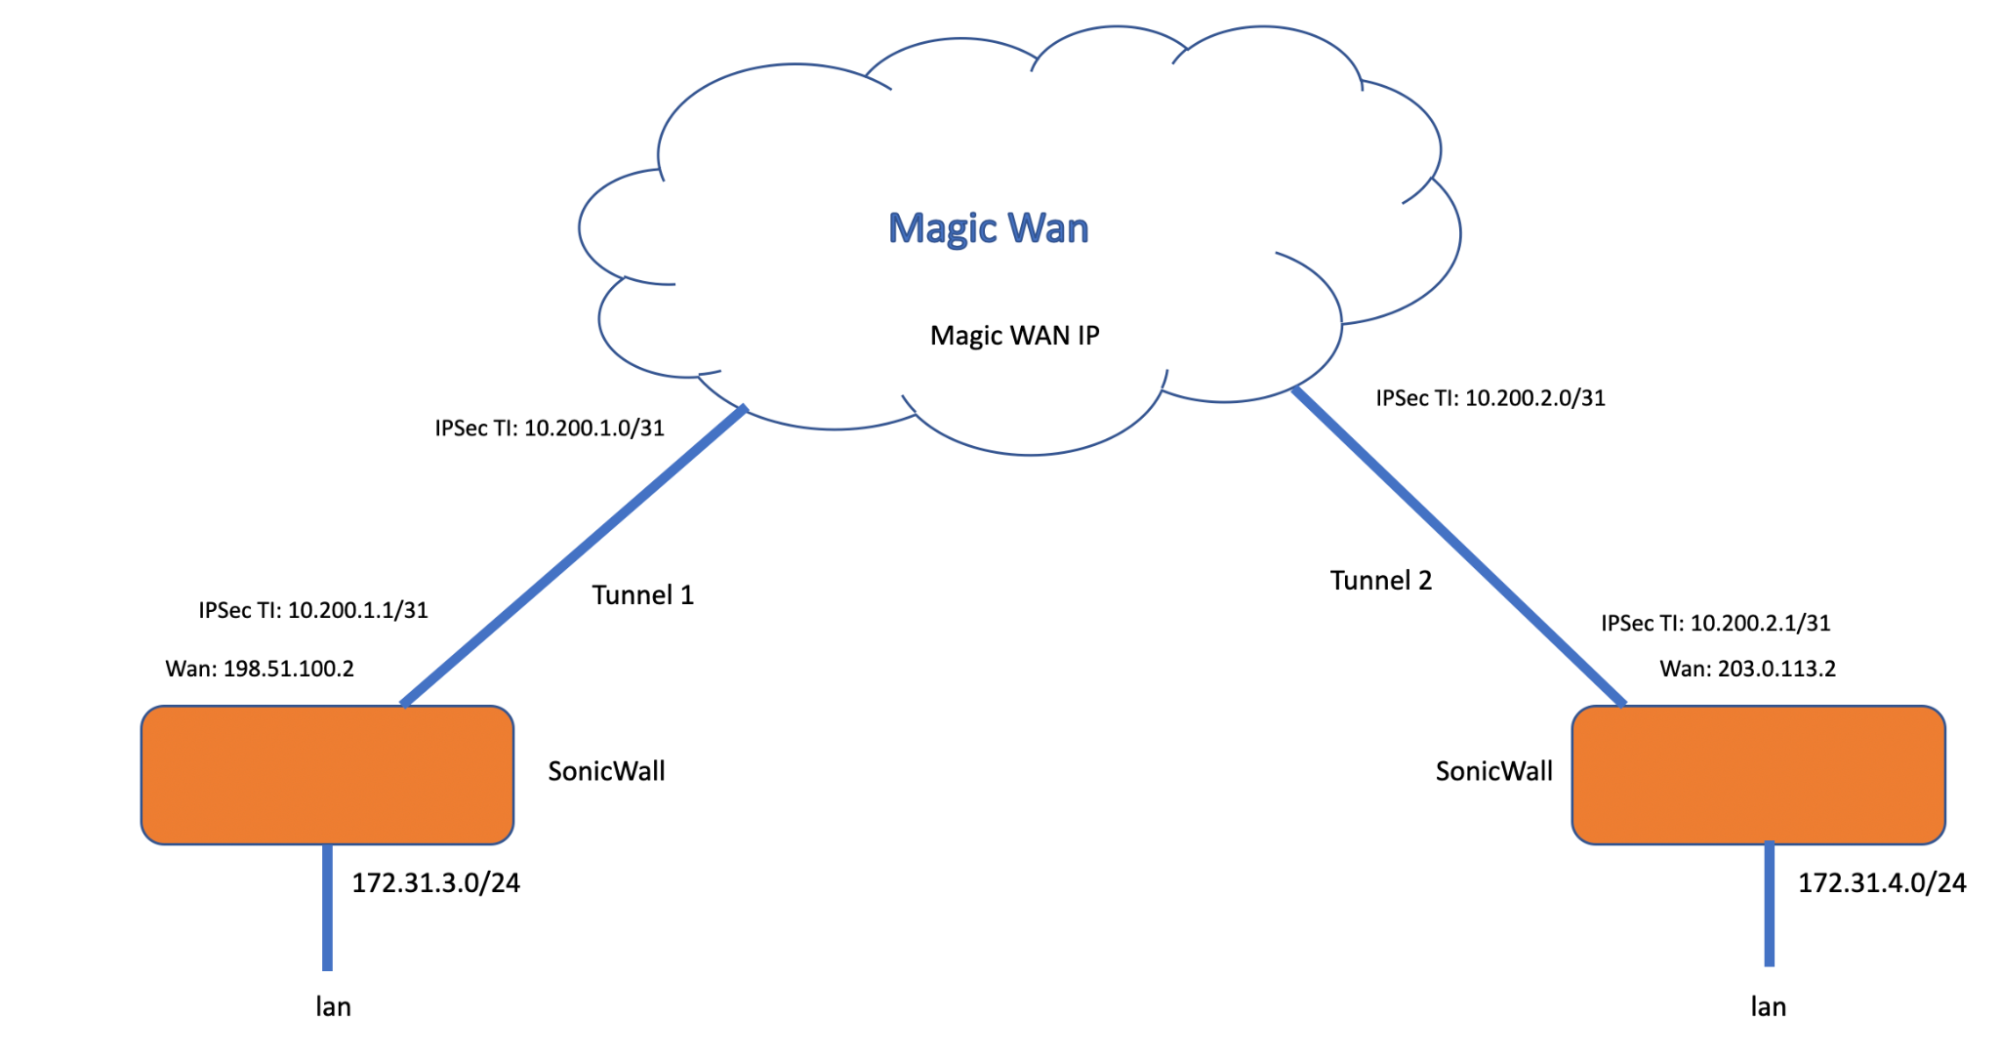 Topology diagram showing how to connect SonicWall appliances to Magic WAN